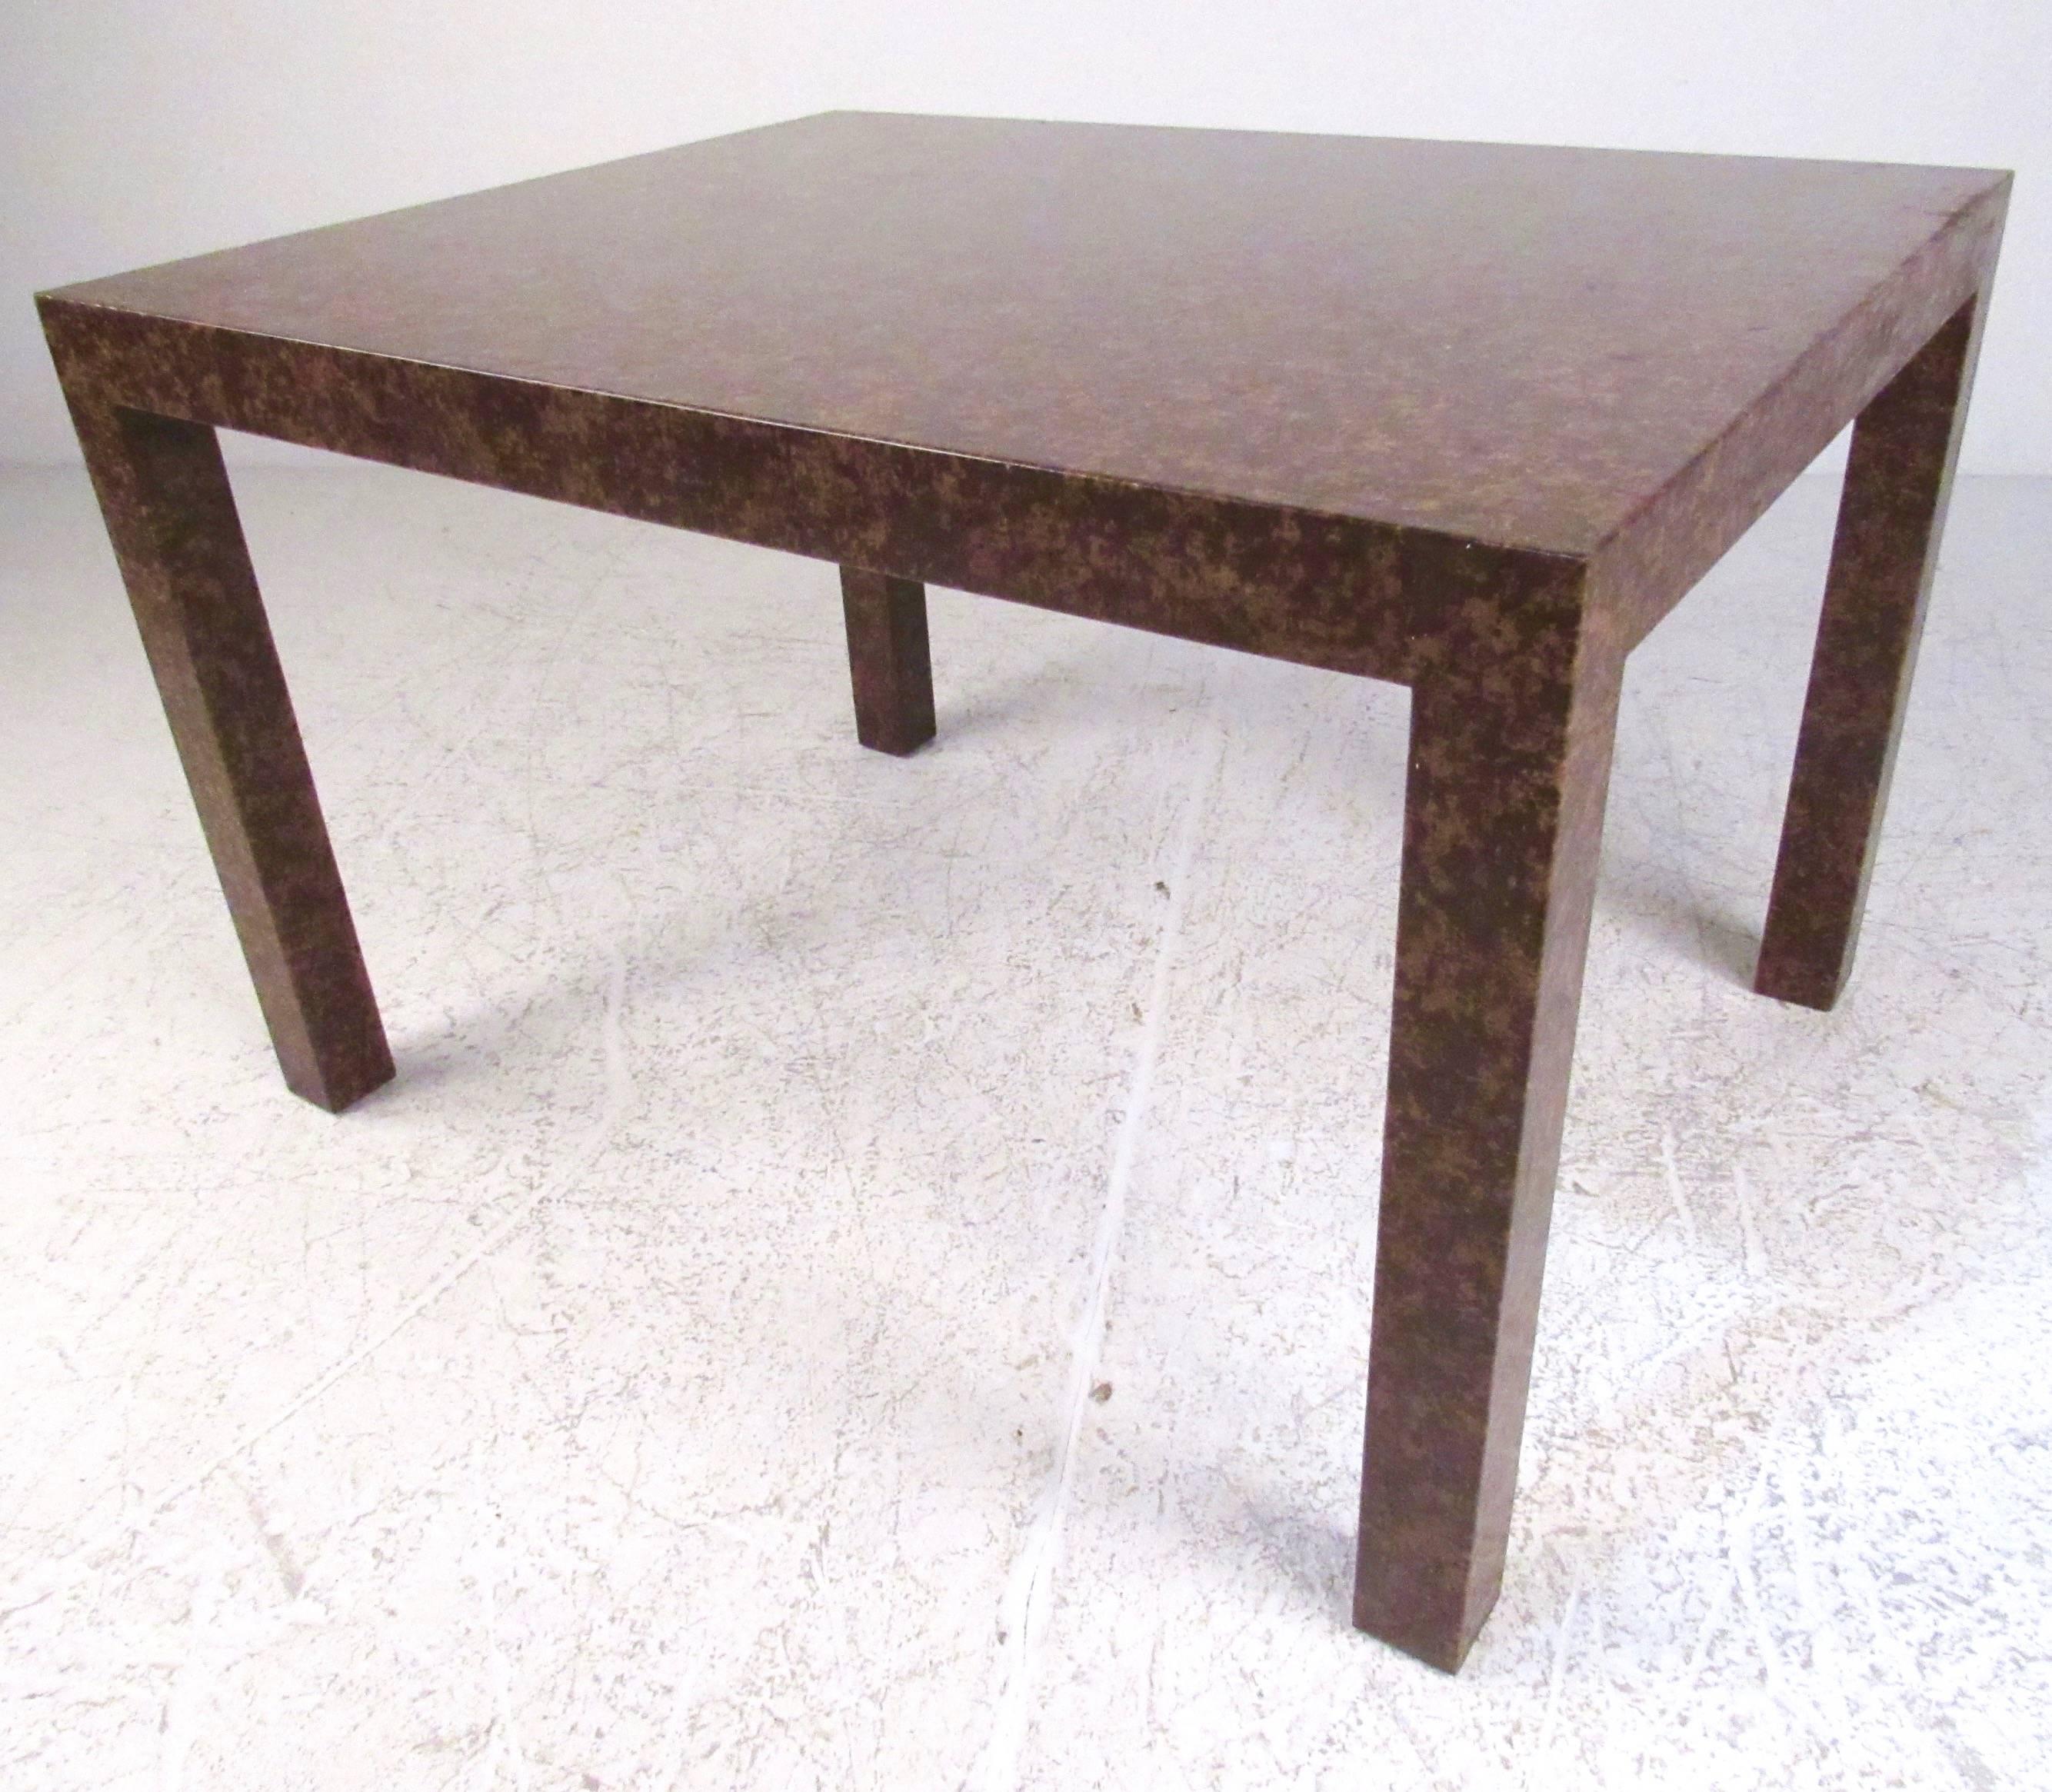 This unique oil-spot lacquered side table features a unique burl-like finish with mid-century modern style design similar to Edward Wormley for Dunbar. Second similar side table (ten inches smaller) also available, please confirm item location (NY